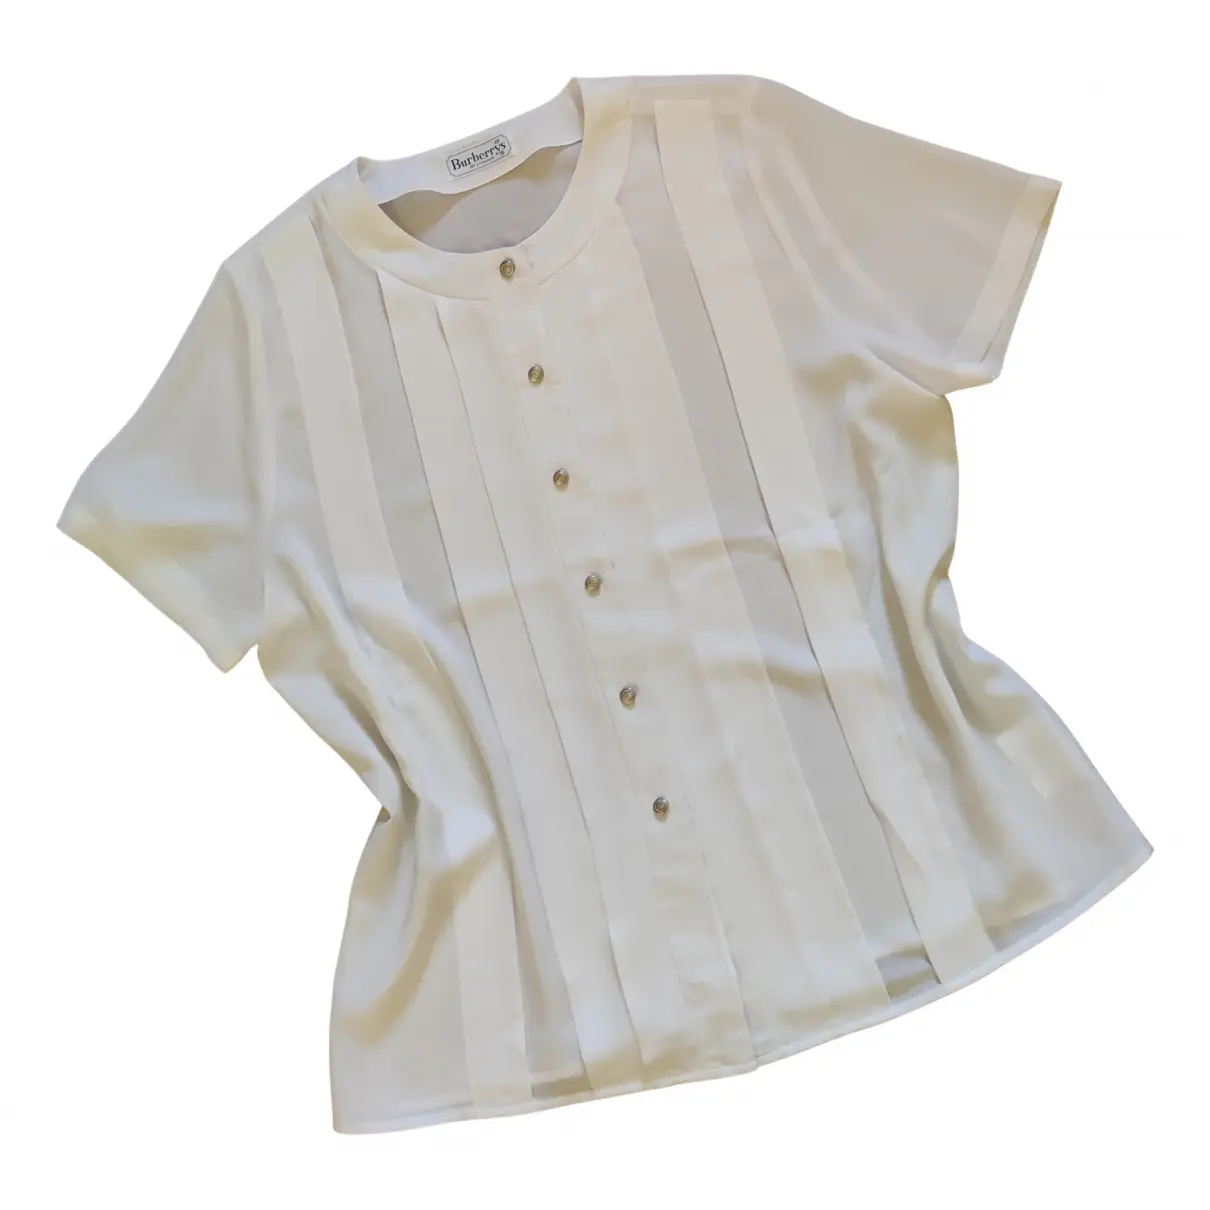 White Polyester Top Burberry - Vintage